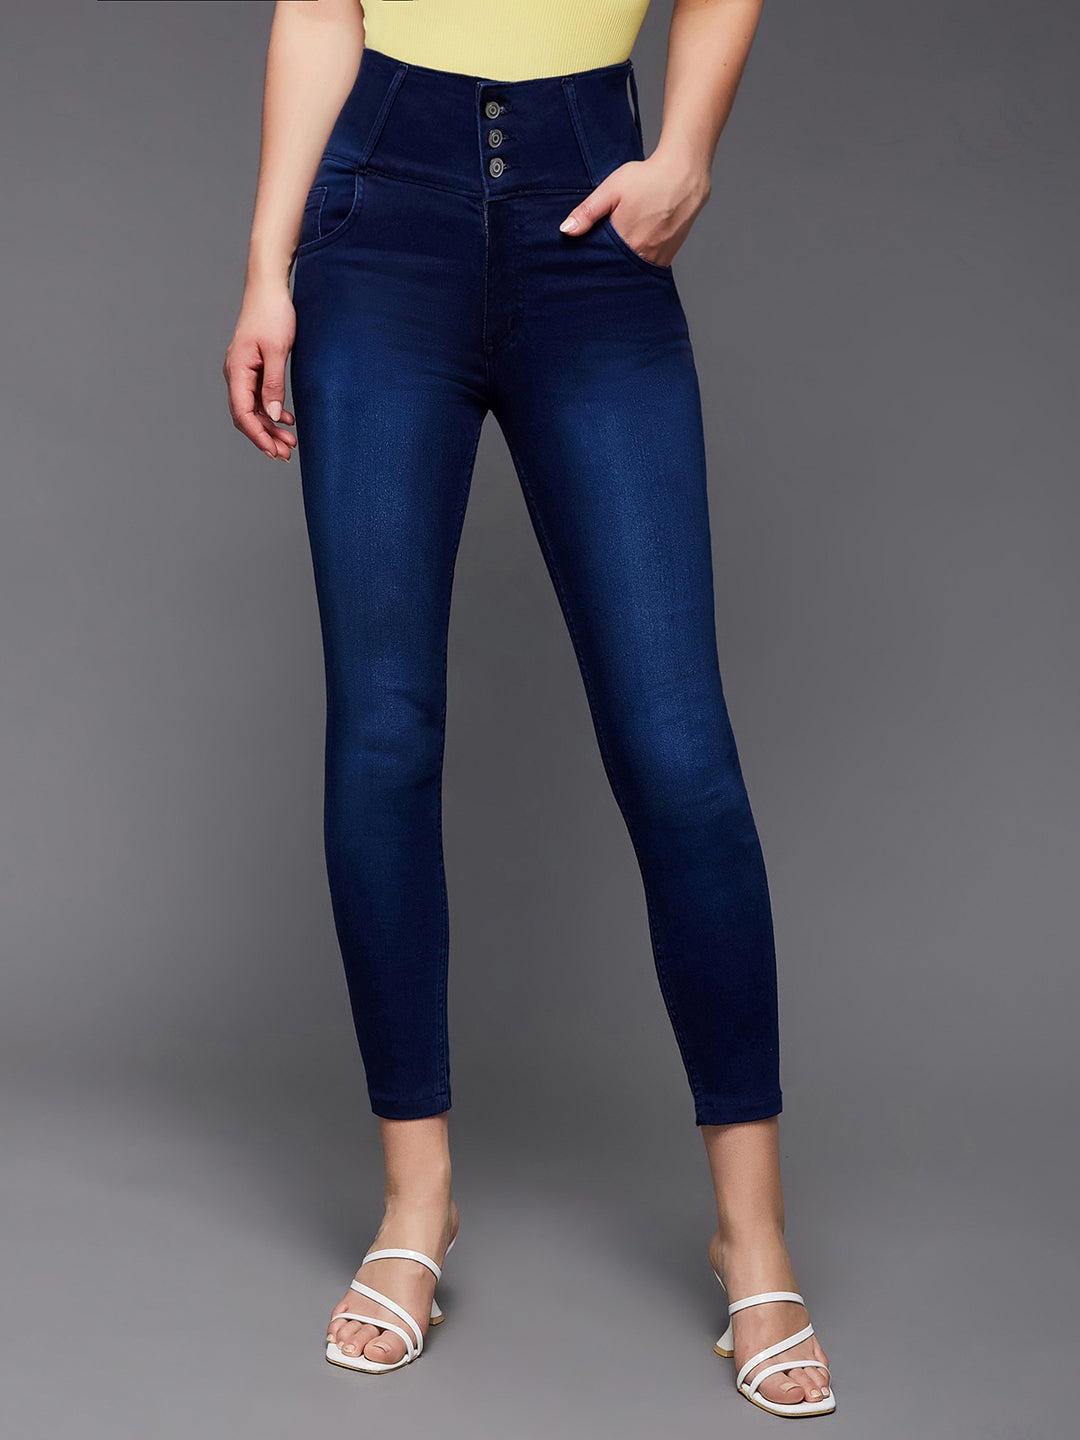 MISS CHASE | Navy Blue Skinny Fit High Rise Clean Look Cropped Length Stretchable High Waist Denim Jeans